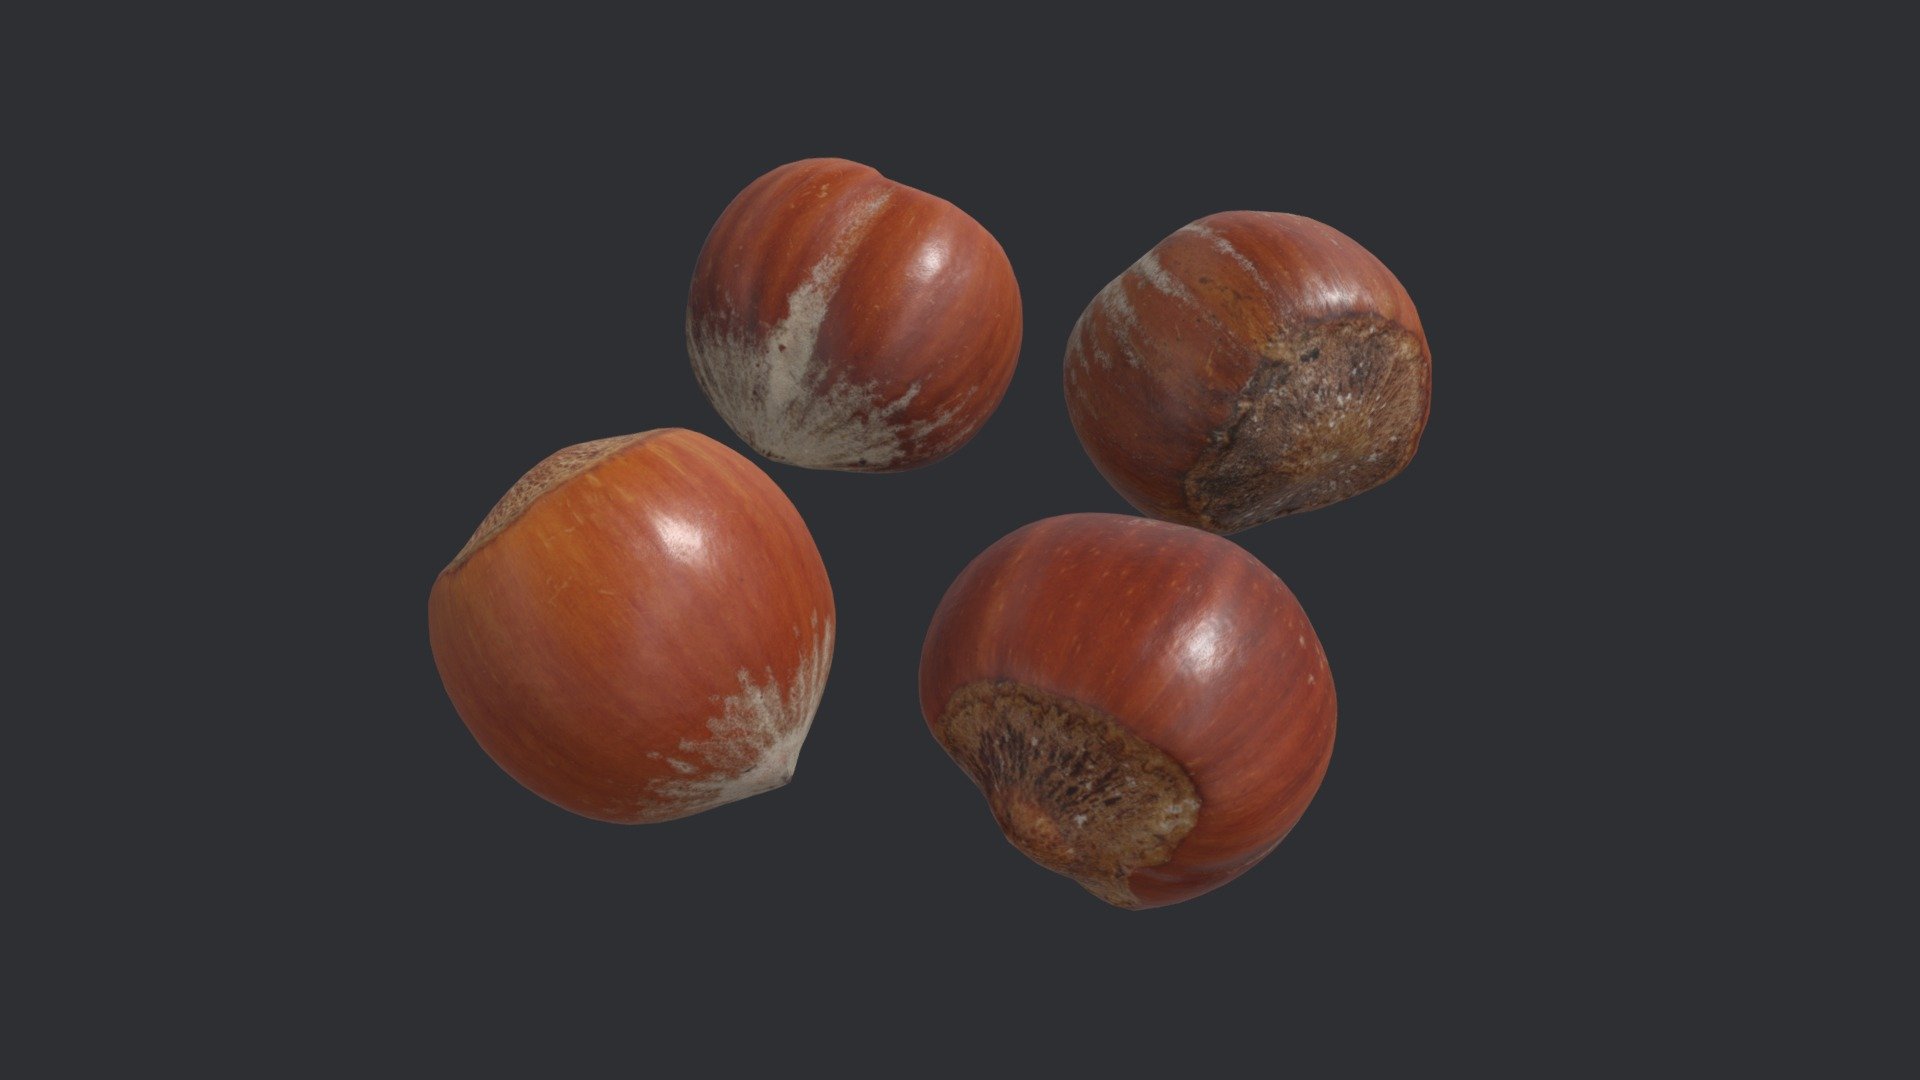 $ individual photogrammetry models of an unshelled hazelnuts.

Each model has three base levels of detail, optimized into uniform triangles with clean UVs.

Lod 1 = 32,000 tris,

Lod 2 = 2,000 tris,

Lod 3 = 500 tris.

Models have 4K PNG textures (Albedo, Normal, Roughness and Gloss). All levels of detail share the same textures except for the Normal, where each LOD has a unique Normal map.

Lod 2 used for 3D preview with 1K JPG textures.

Real world scale 3d model